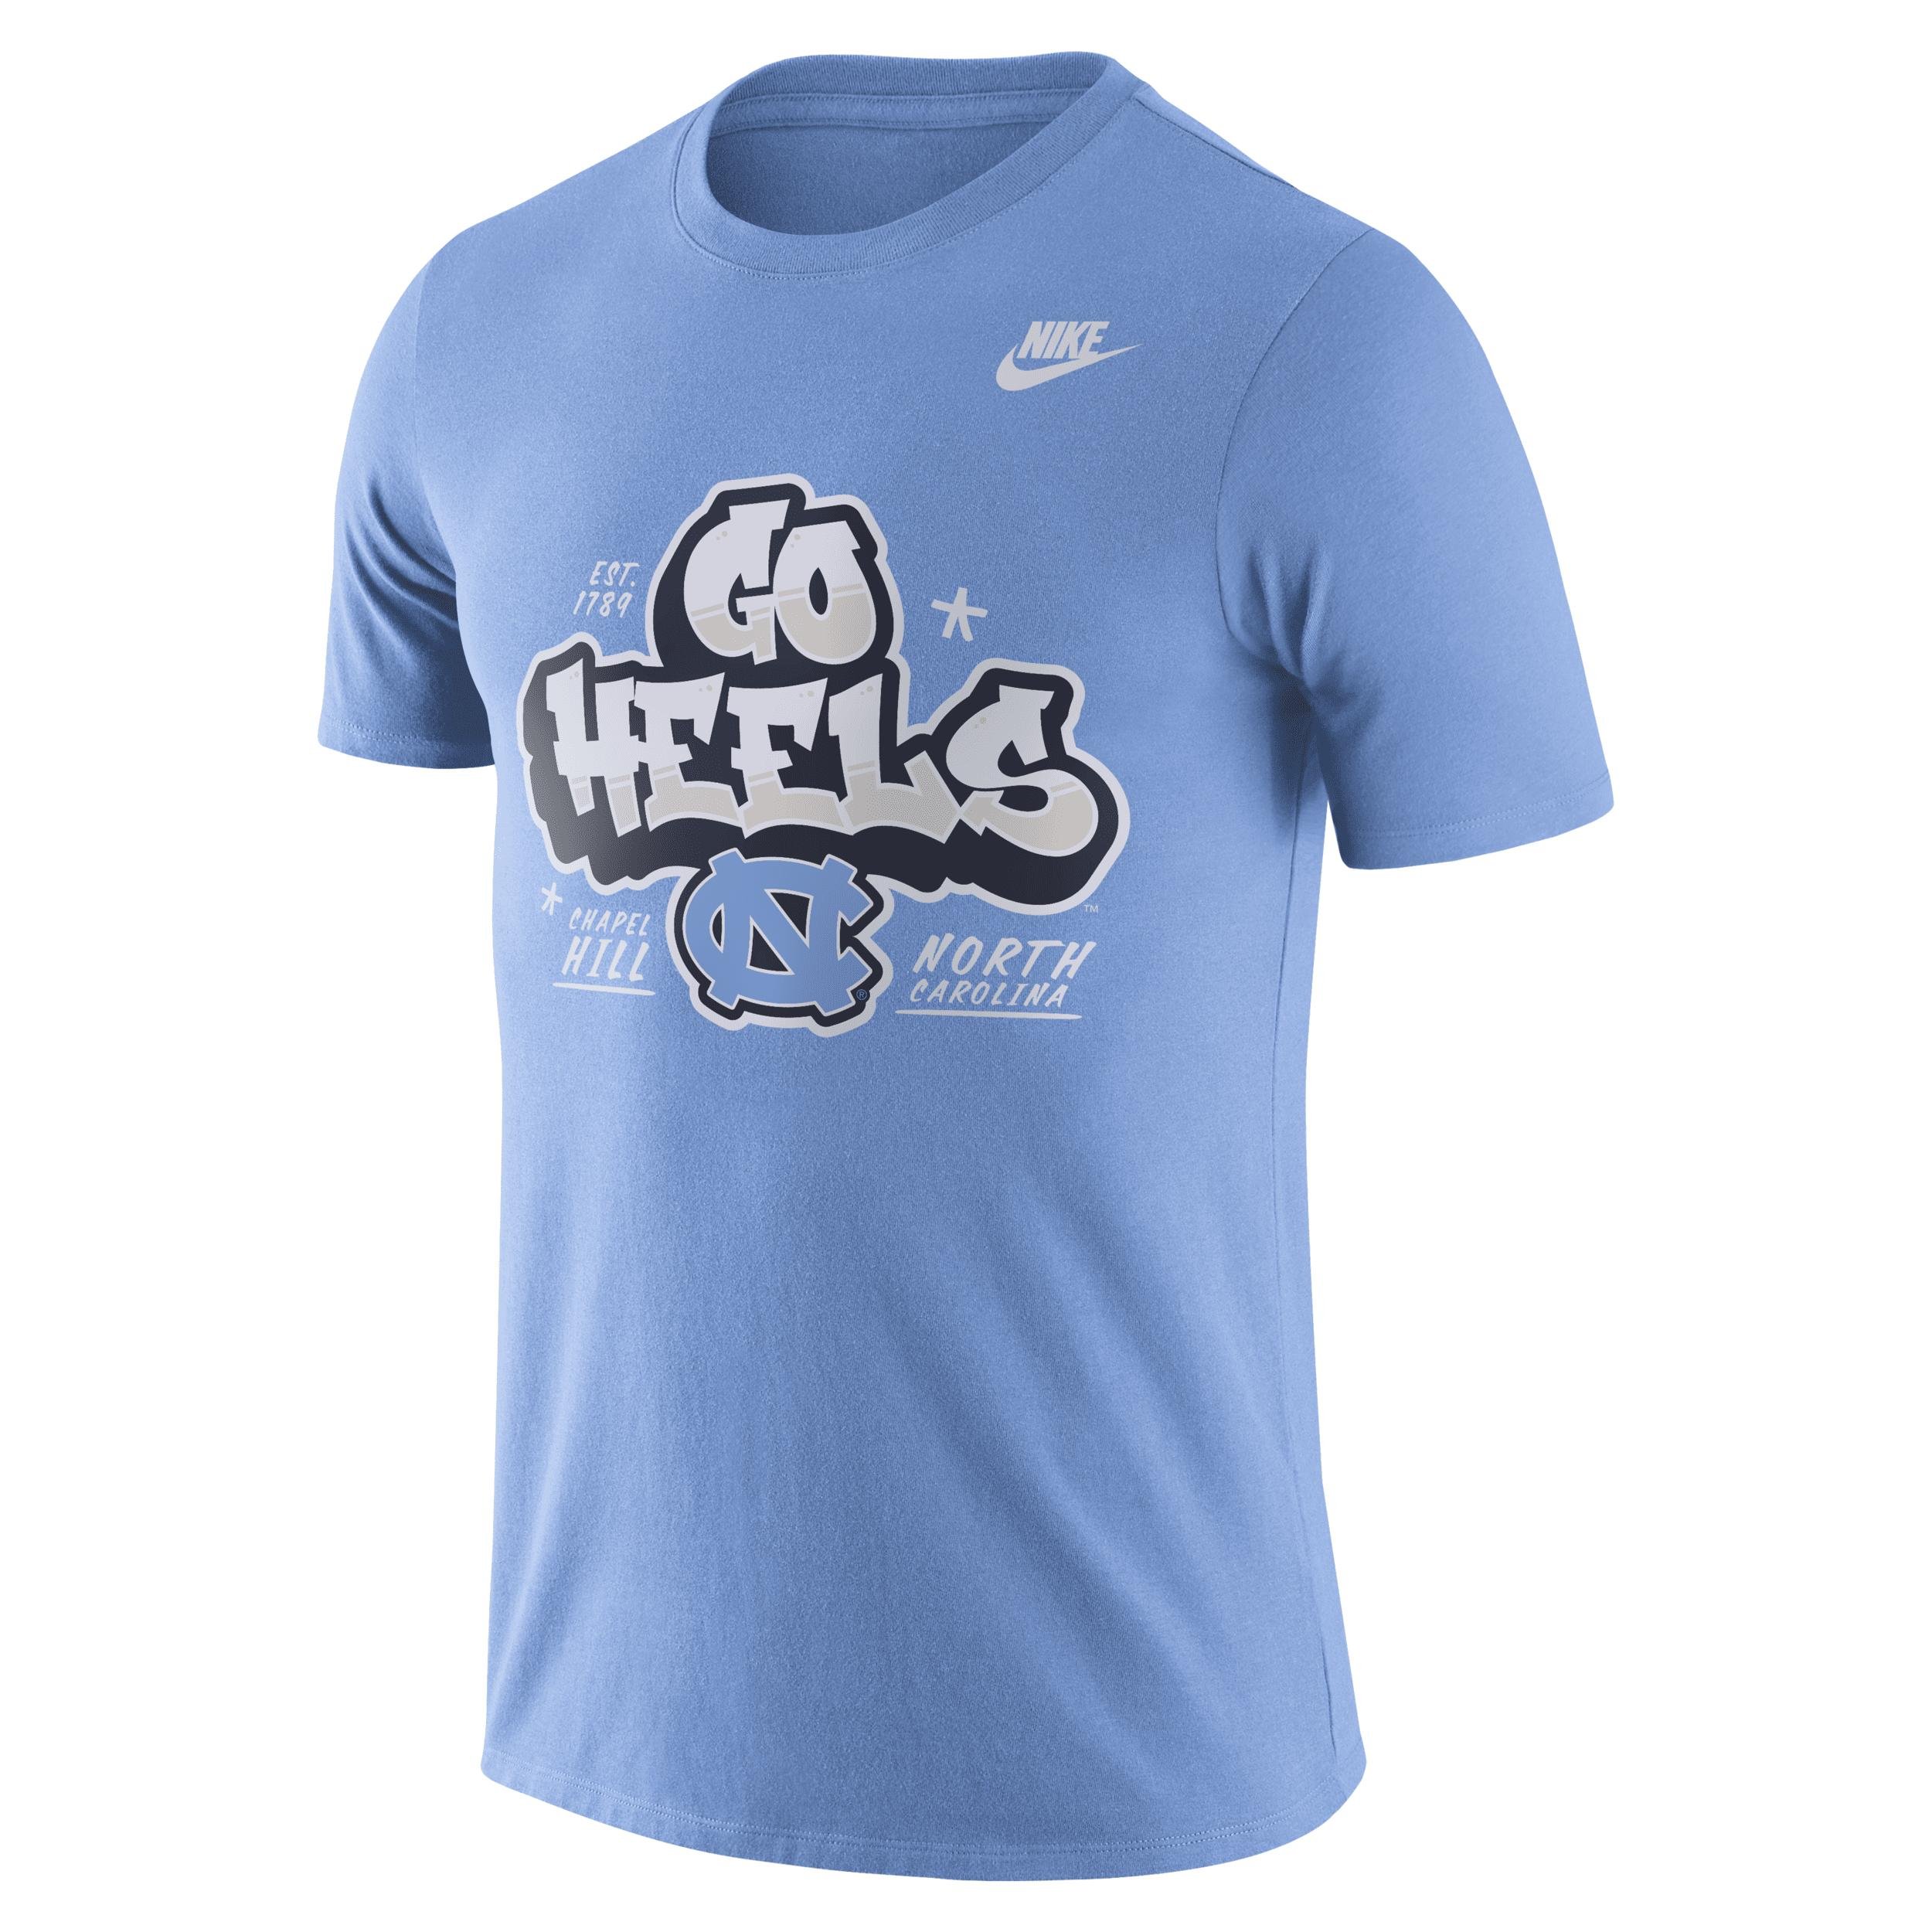 UNC Nike Men's College T-Shirt by NIKE